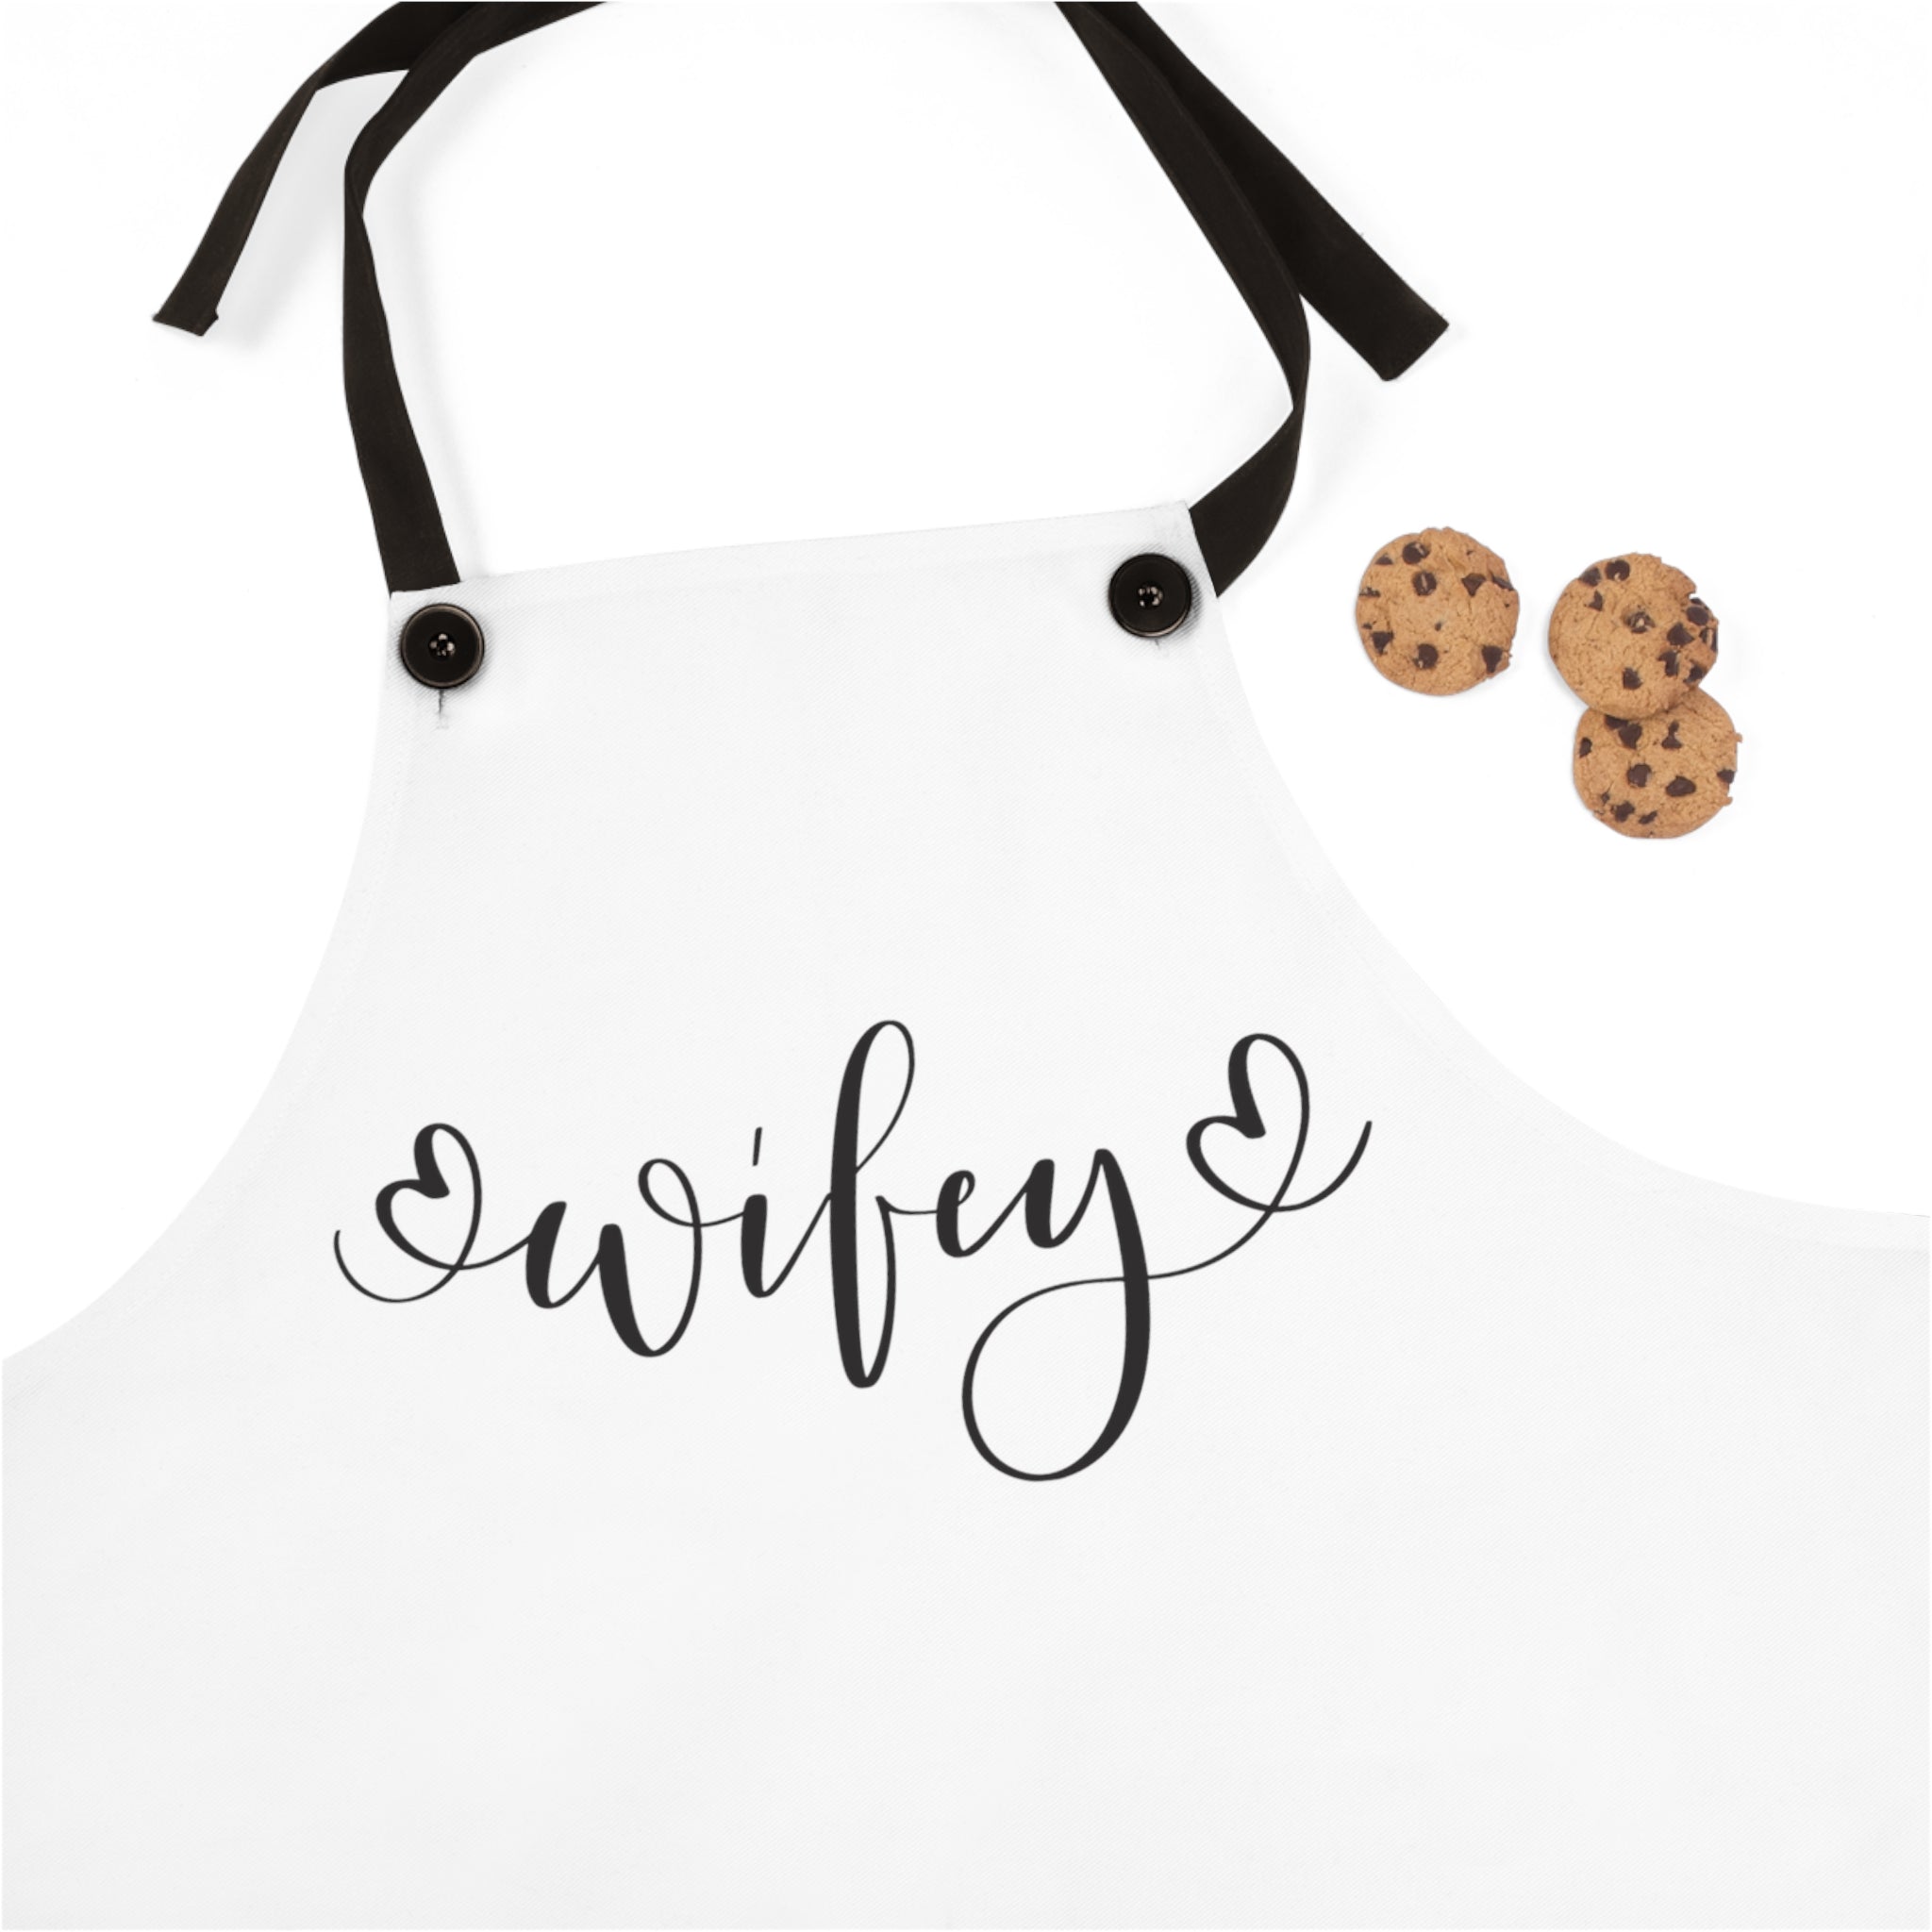 Wifey Apron (AOP)! Perfect gift for her!